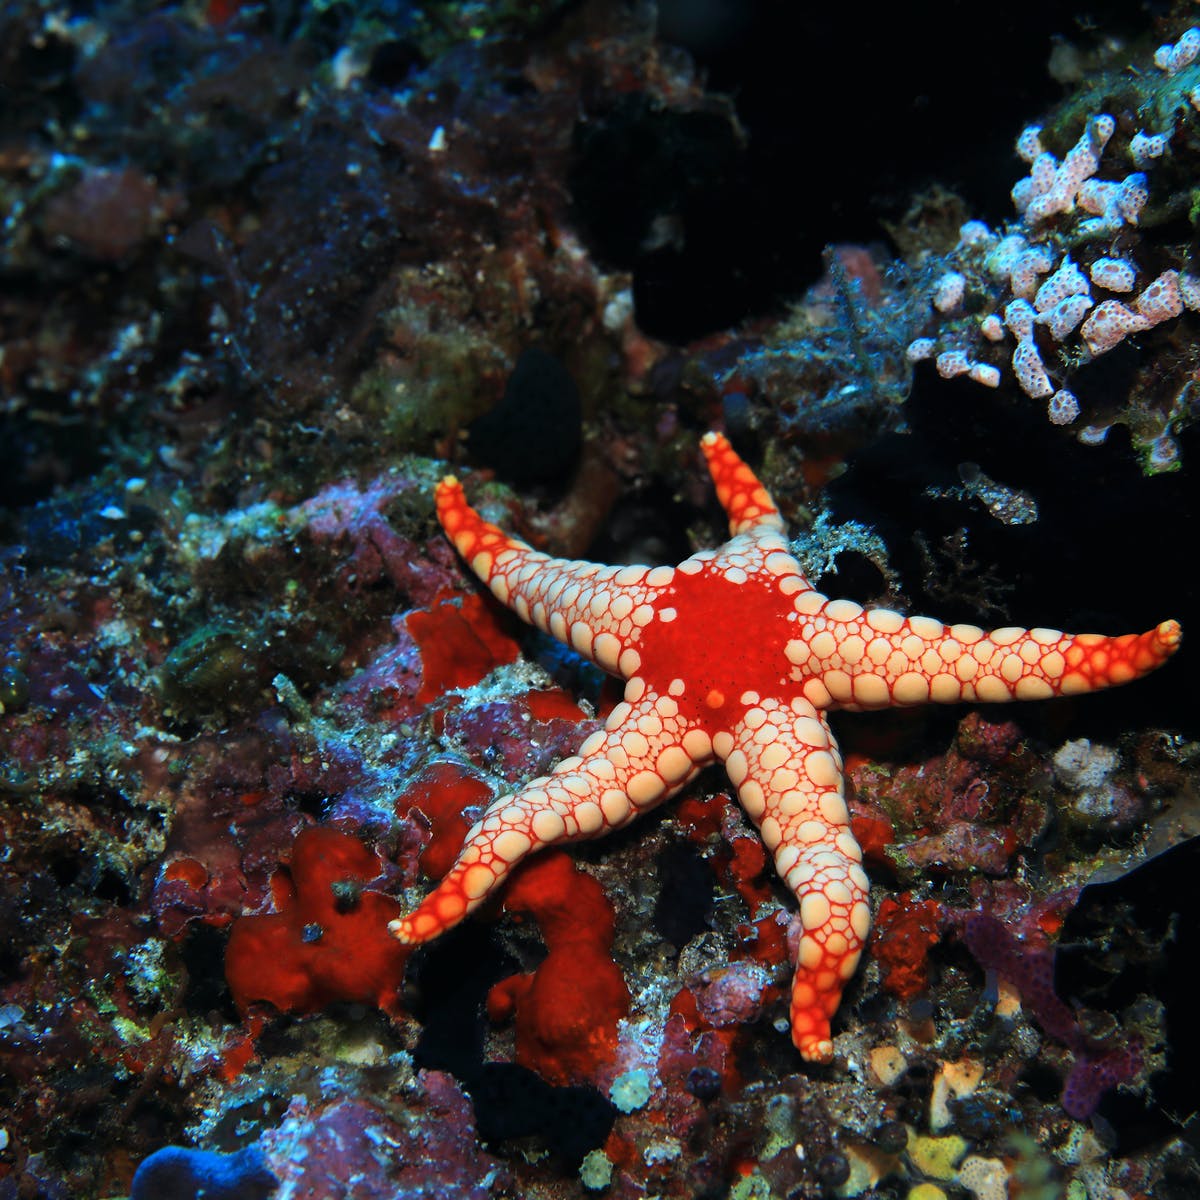 Facts on starfish eating habits